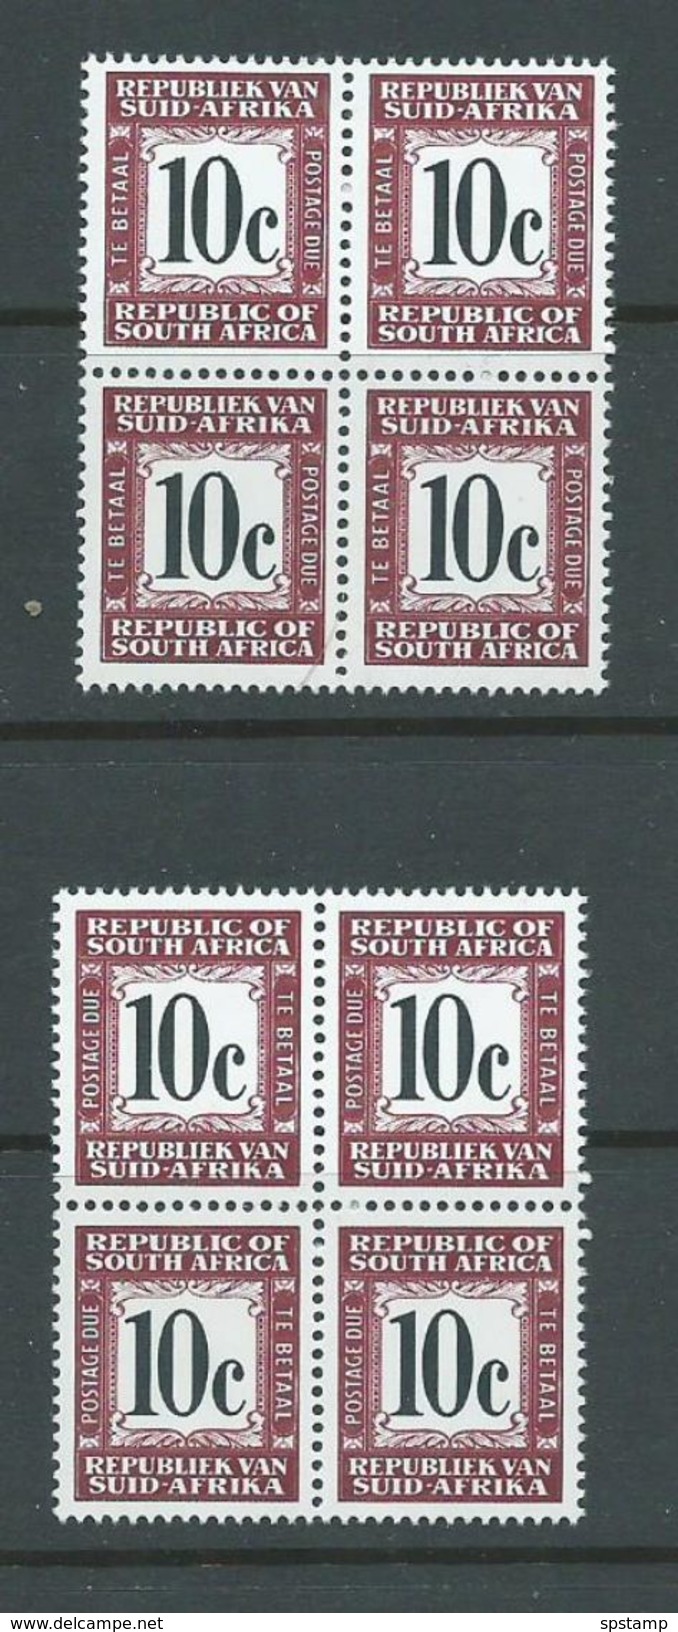 South Africa 1967 10c Purple-Brown & Black Postage Due Both Inscriptions MNH Blocks Of 4 - Unused Stamps